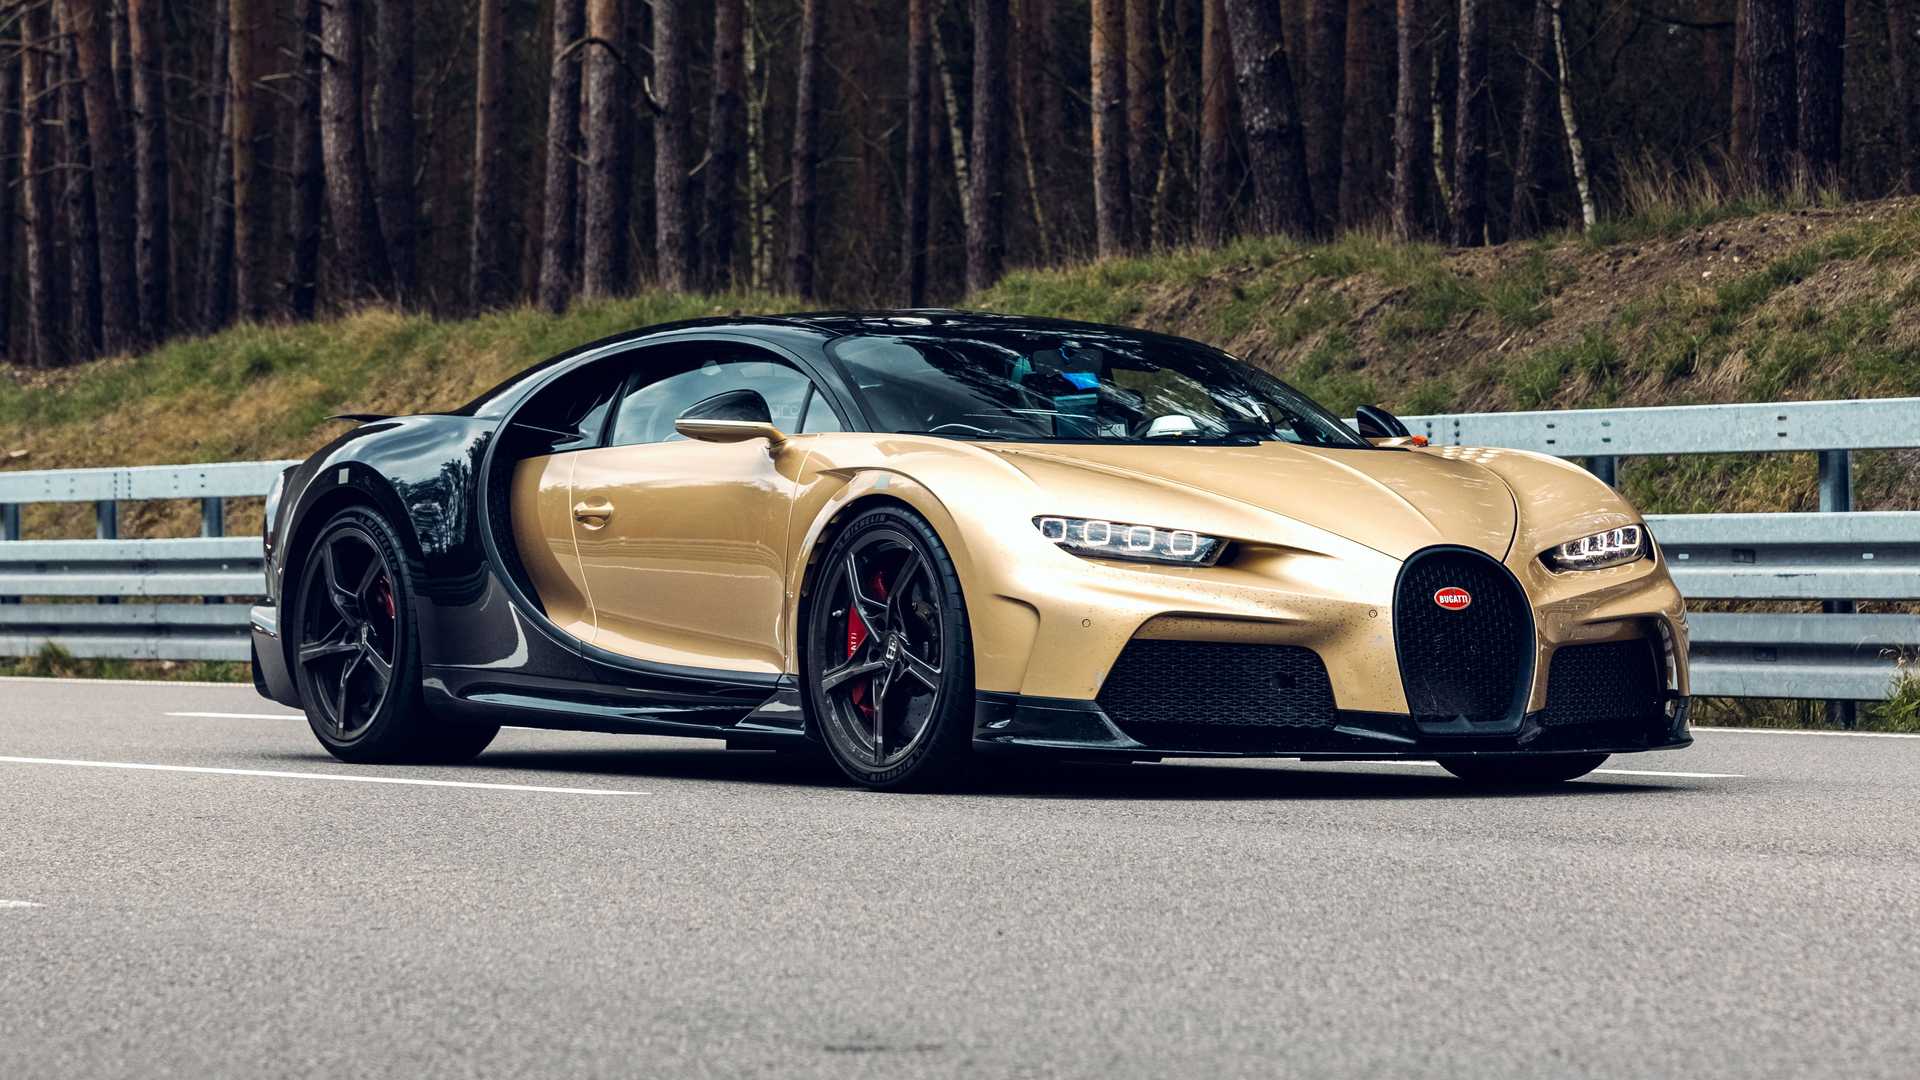 Sold out! All Bugatti Chirons already have an assigned owner